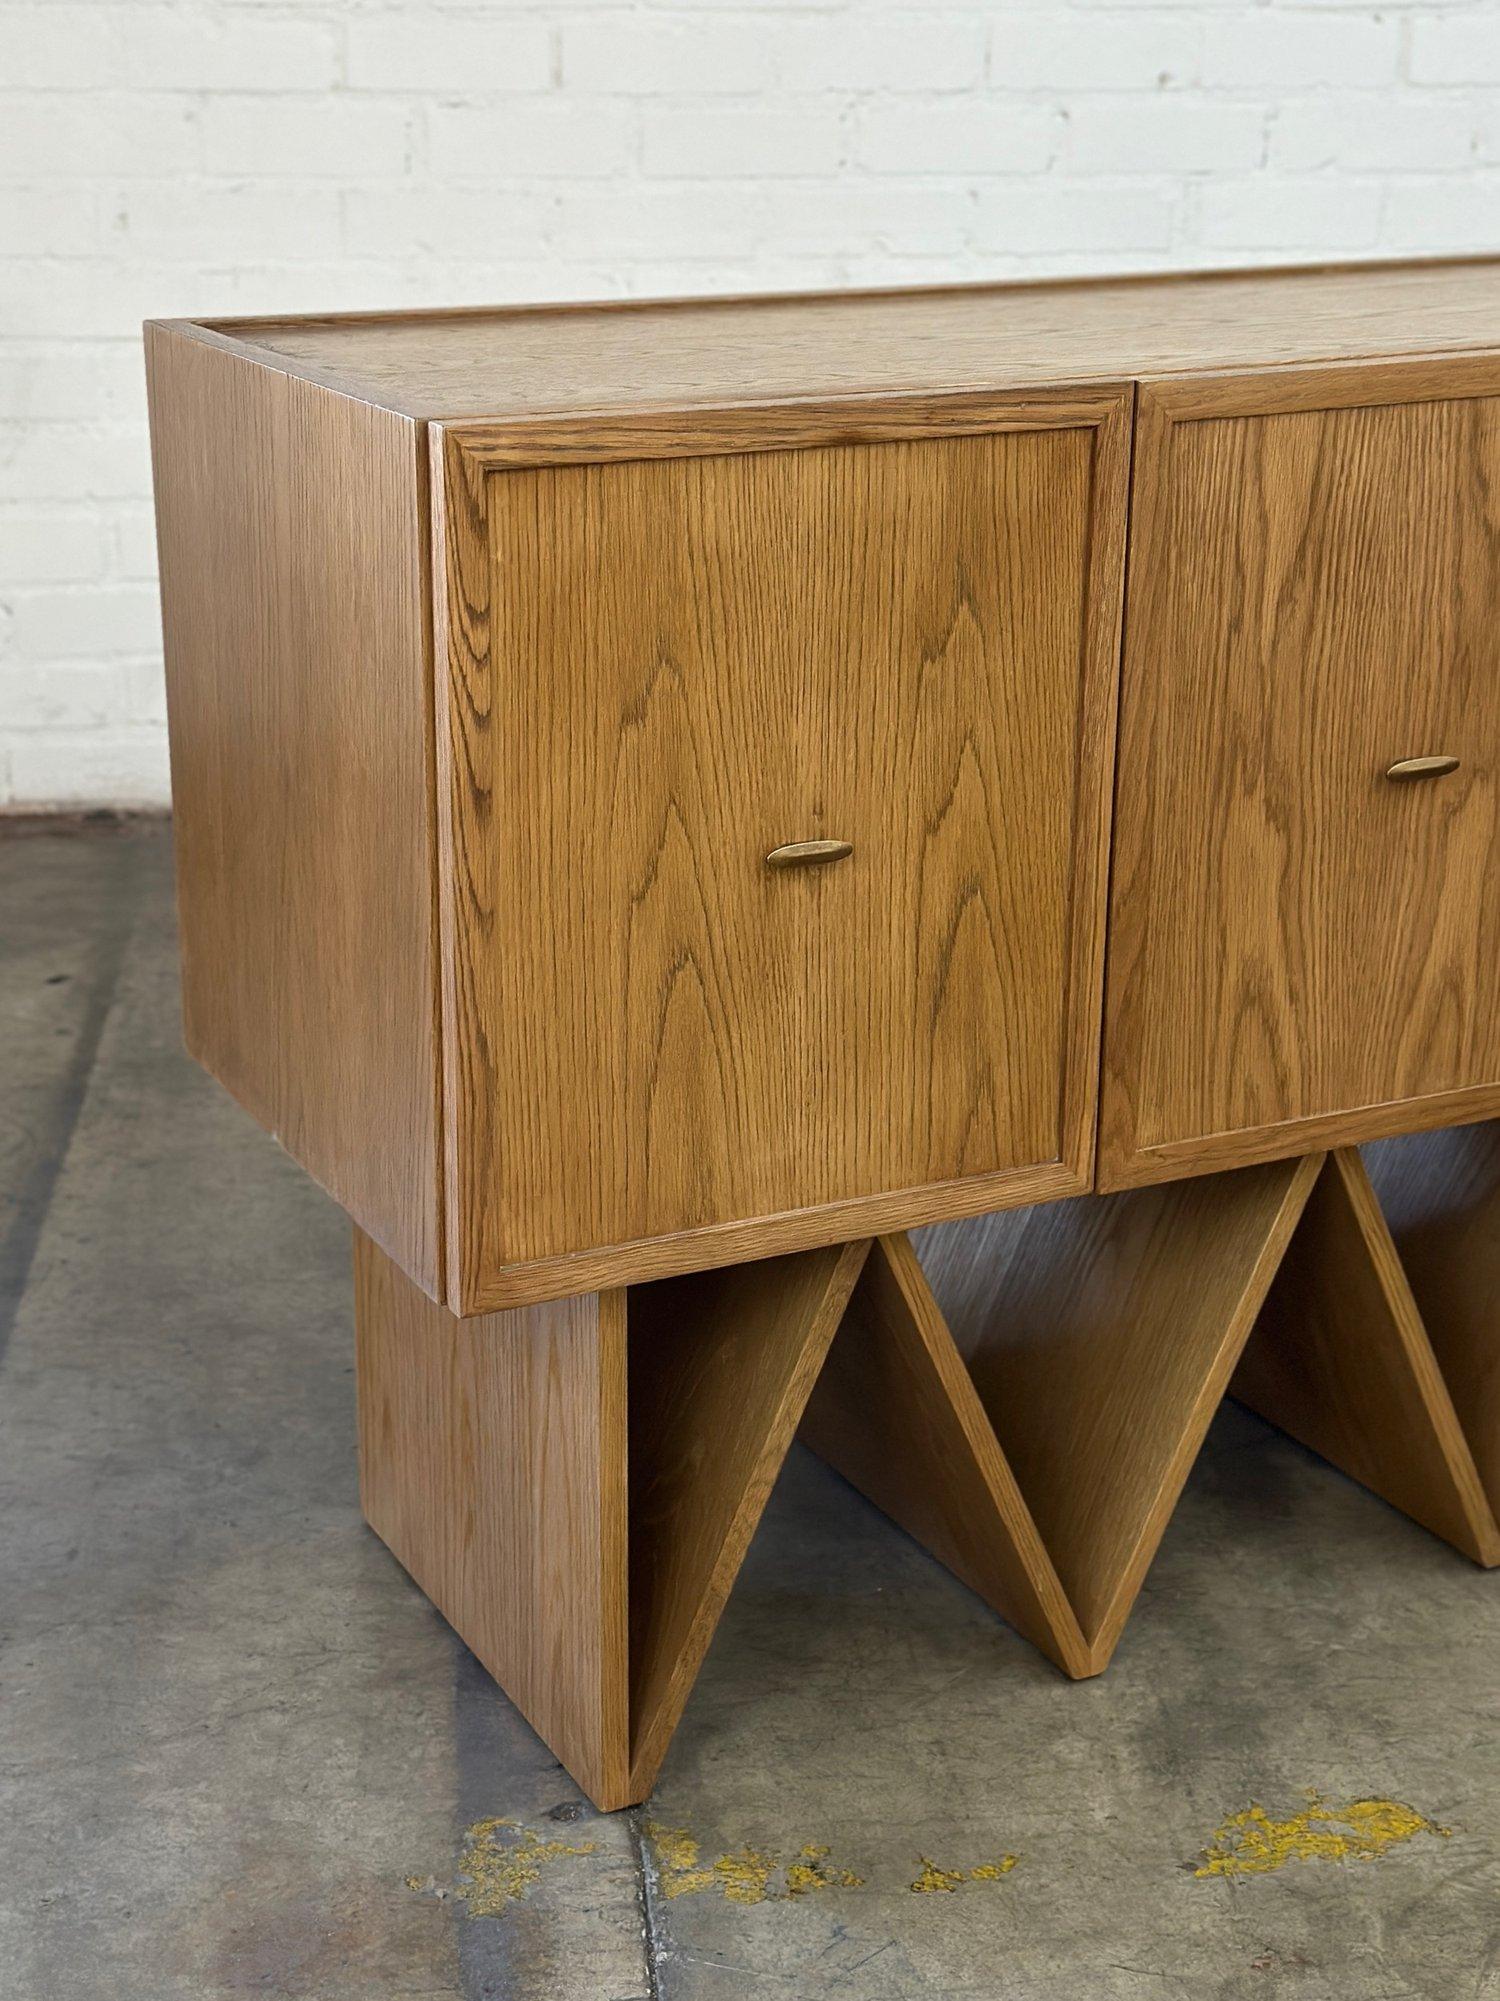 W51 D20.5 H35

Fun refinished credenza custom made for a very prominent hotel in Los Angeles. Credenza has been fully restored and item is structurally sound and fully functional. Item feature thick white oak grain with texture, a fun zigzag base,